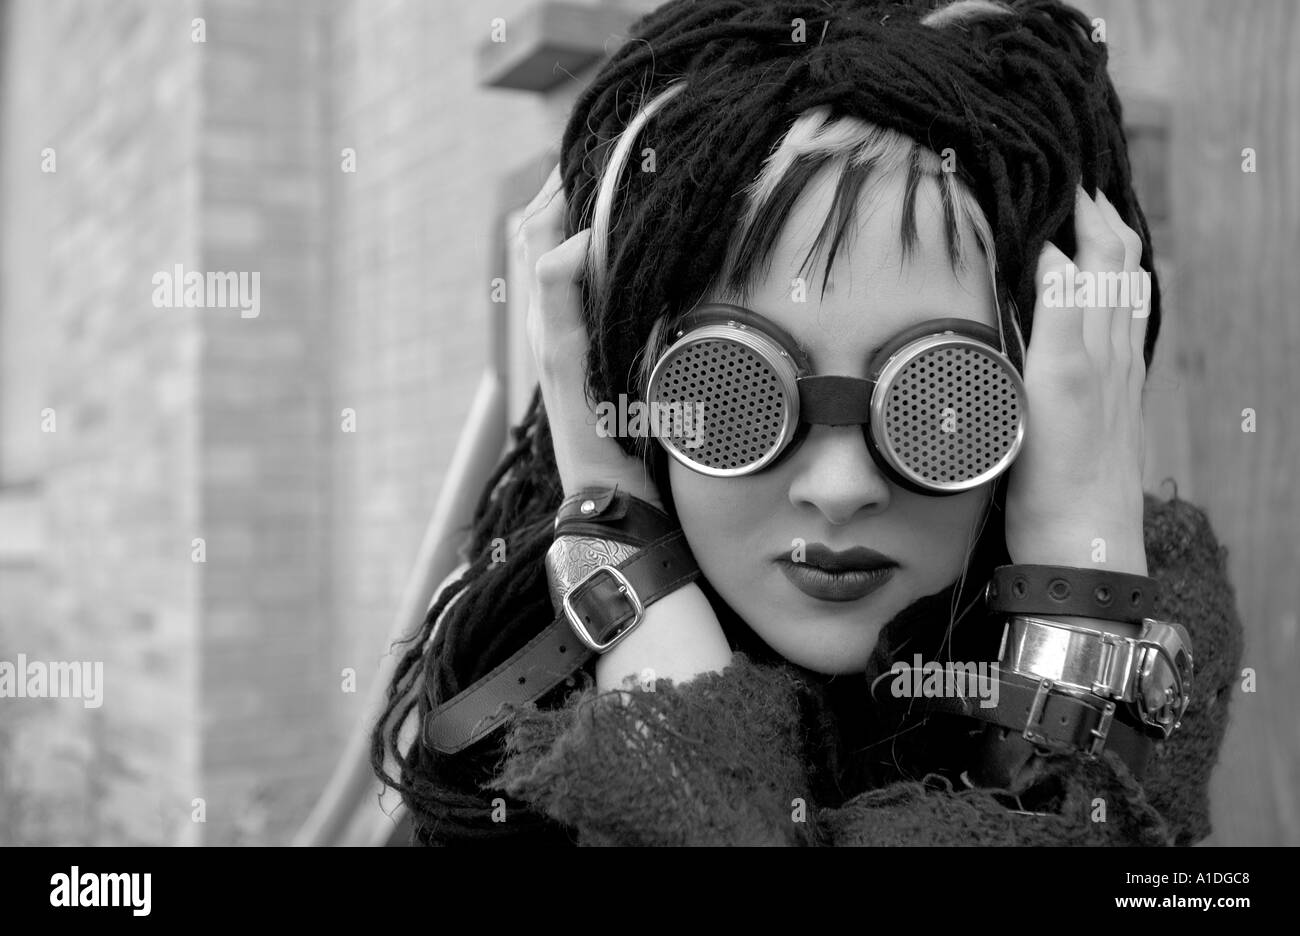 Portrait of goth girl wearing goggles Stock Photo